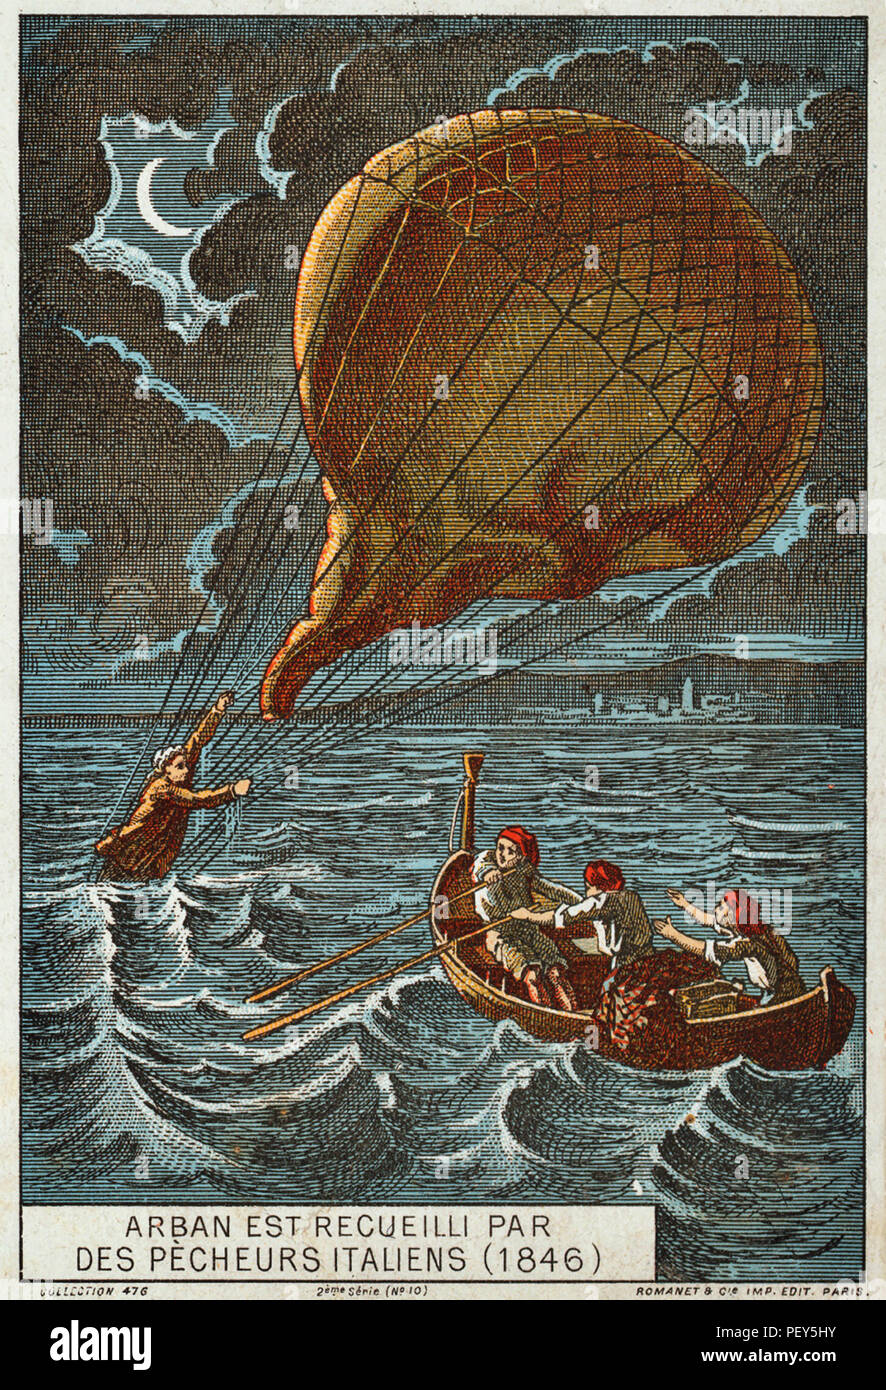 FRANCISQUE ARBAN (1815-1849 ?) French balloonist. A late 19th century French collecting card showing his rescue by Italian fishermen in 1846. Stock Photo